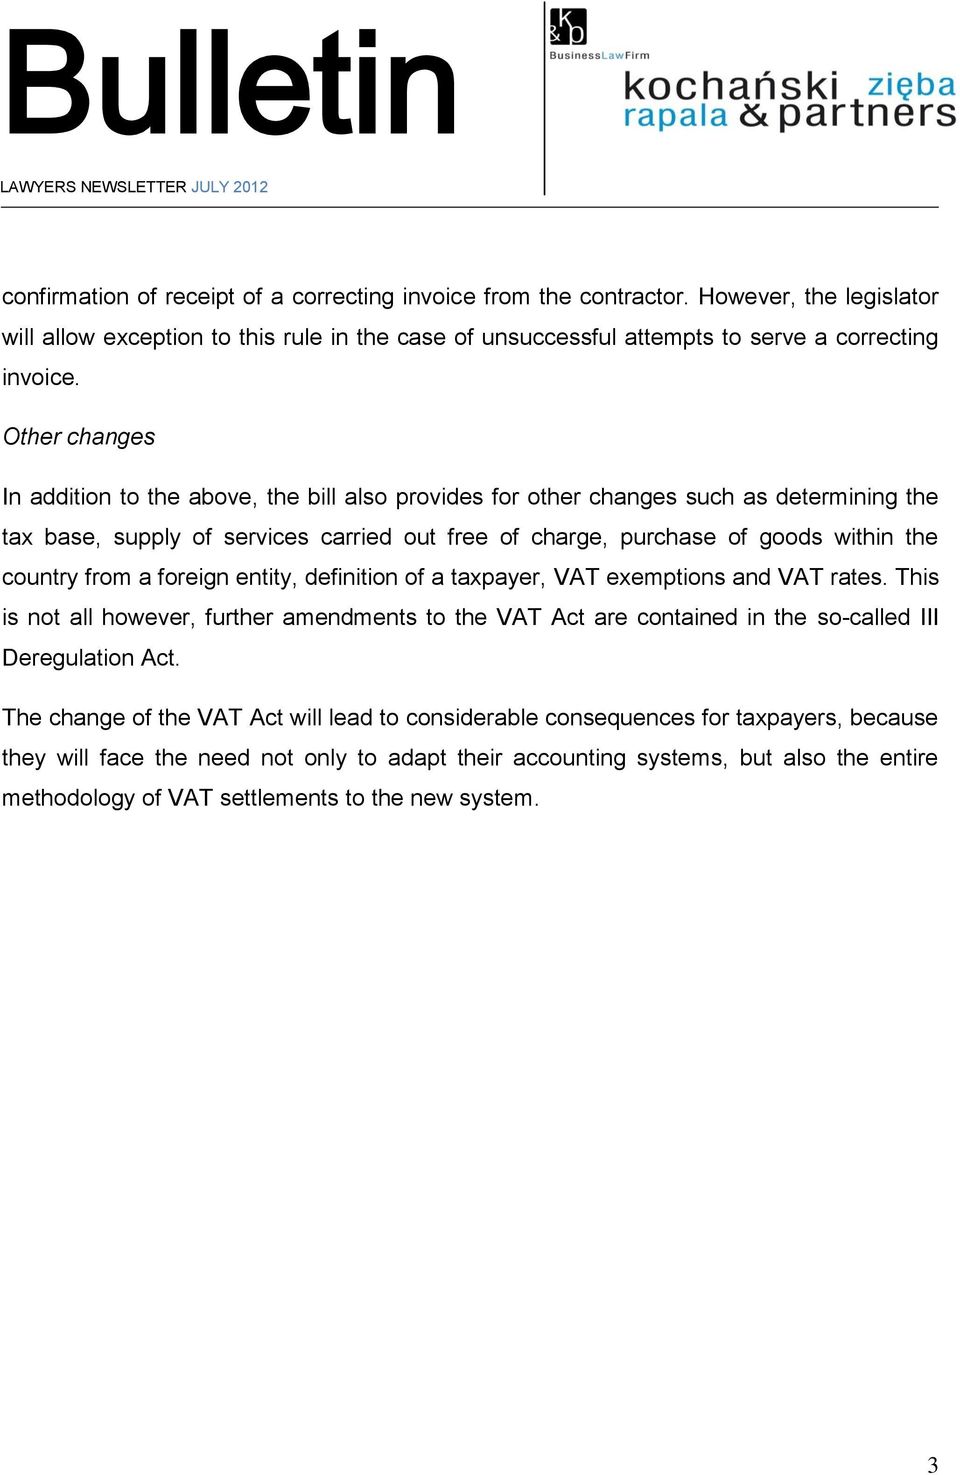 from a foreign entity, definition of a taxpayer, VAT exemptions and VAT rates. This is not all however, further amendments to the VAT Act are contained in the so-called III Deregulation Act.